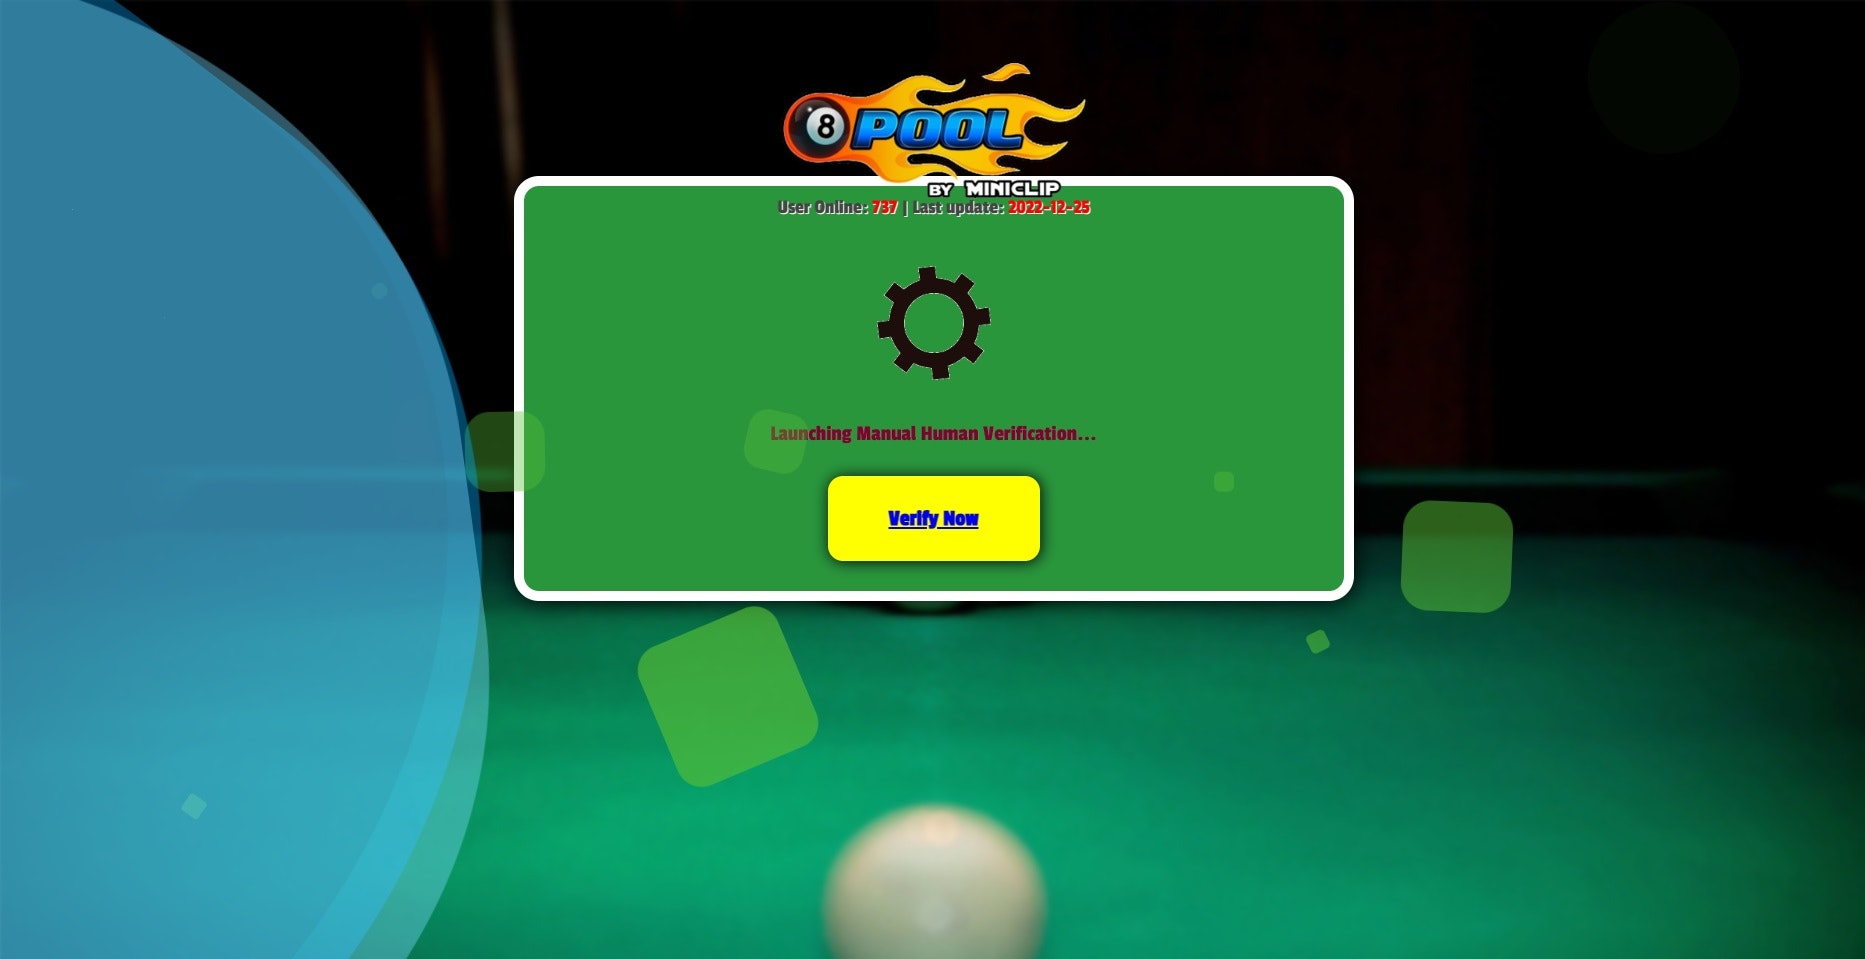 8 Ball Pool Coins Generator 100% Working 2022 / X